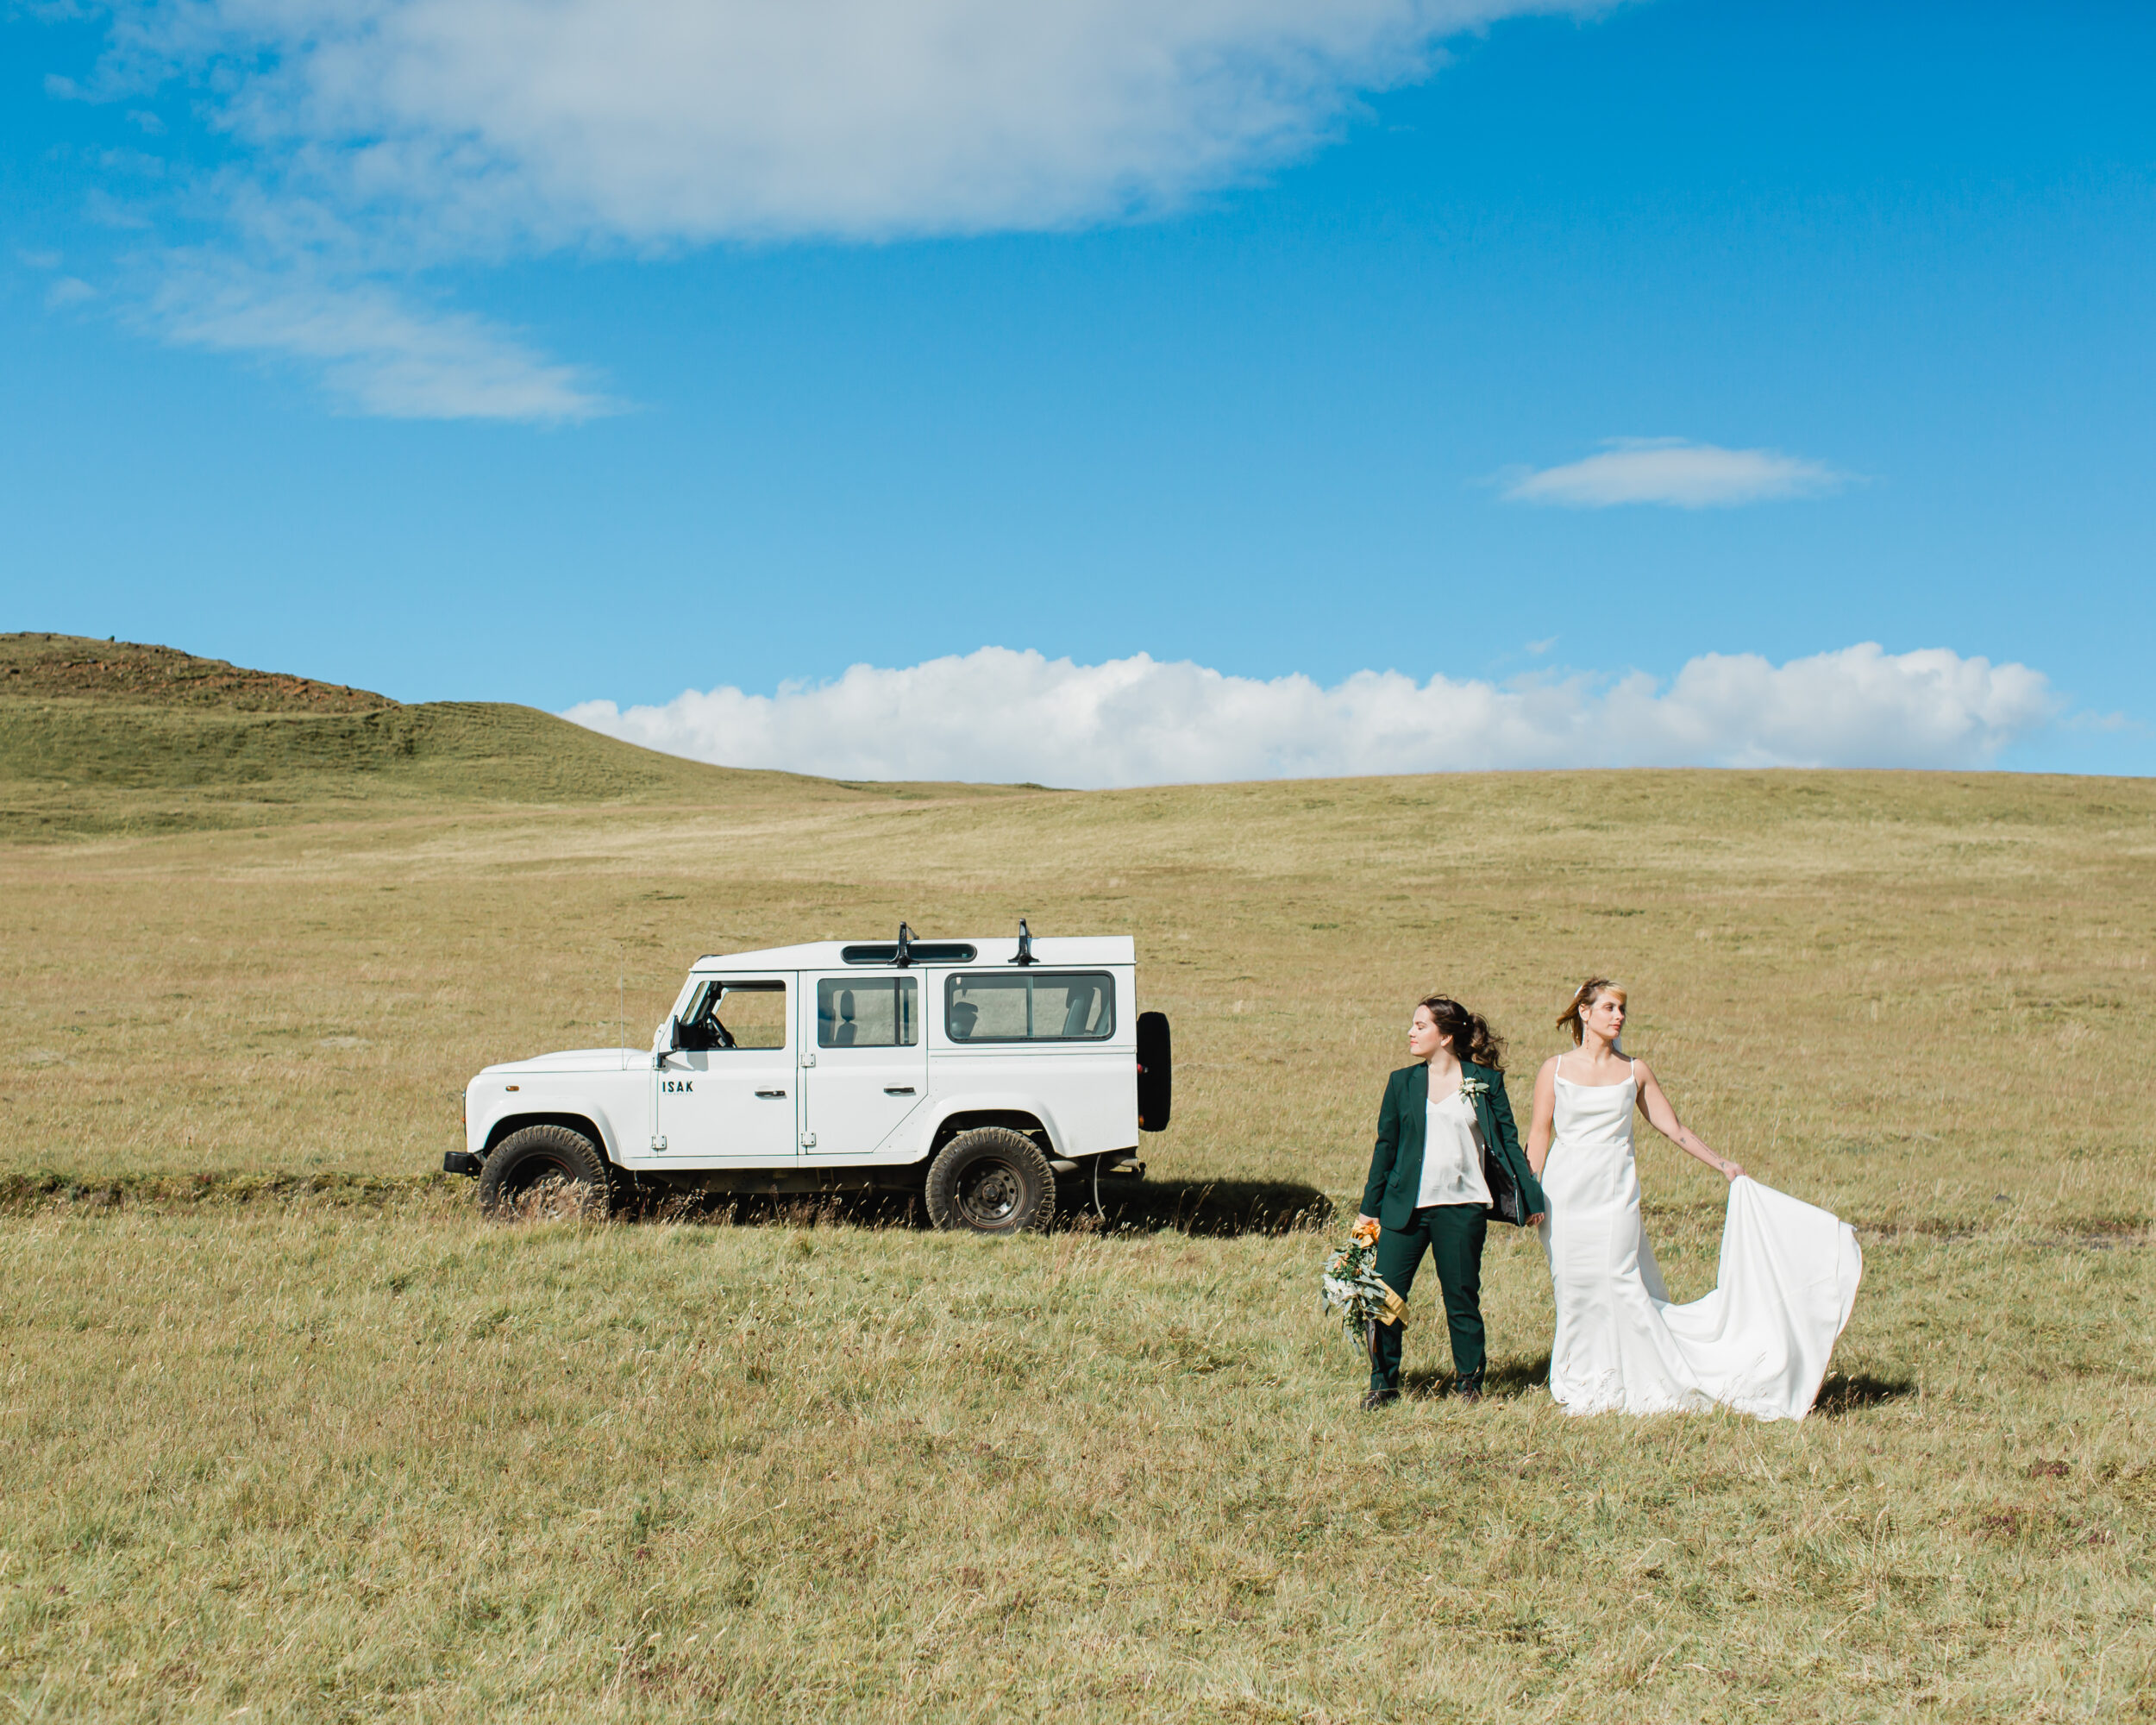 A couple stands in a grassy meadow in Iceland next to a 4x4 vehicle.